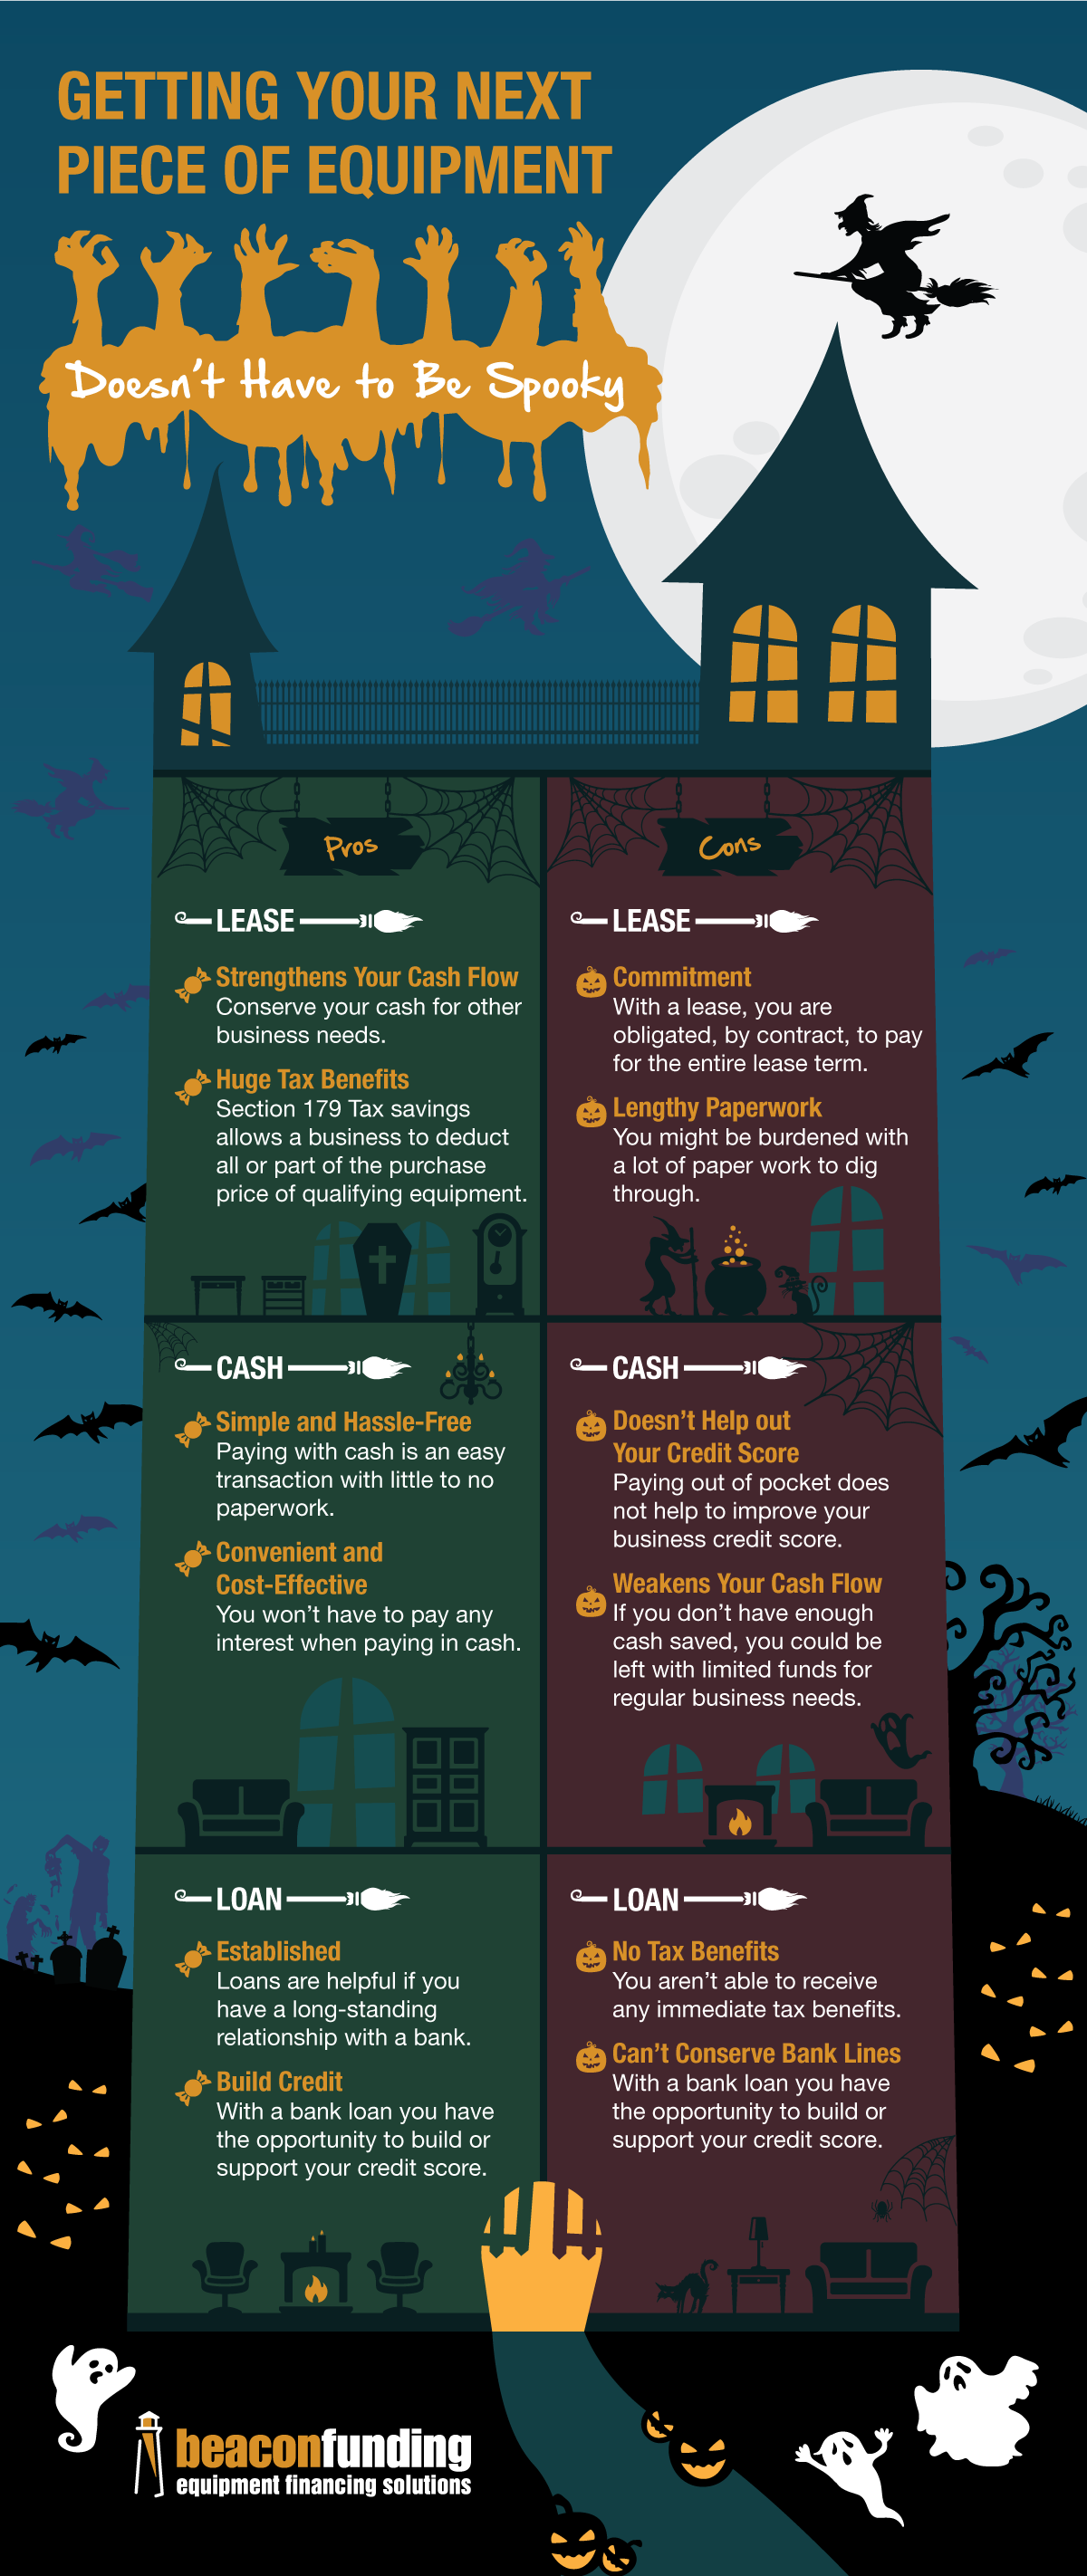 Halloween Edition Equipment Purchase Options Infographic